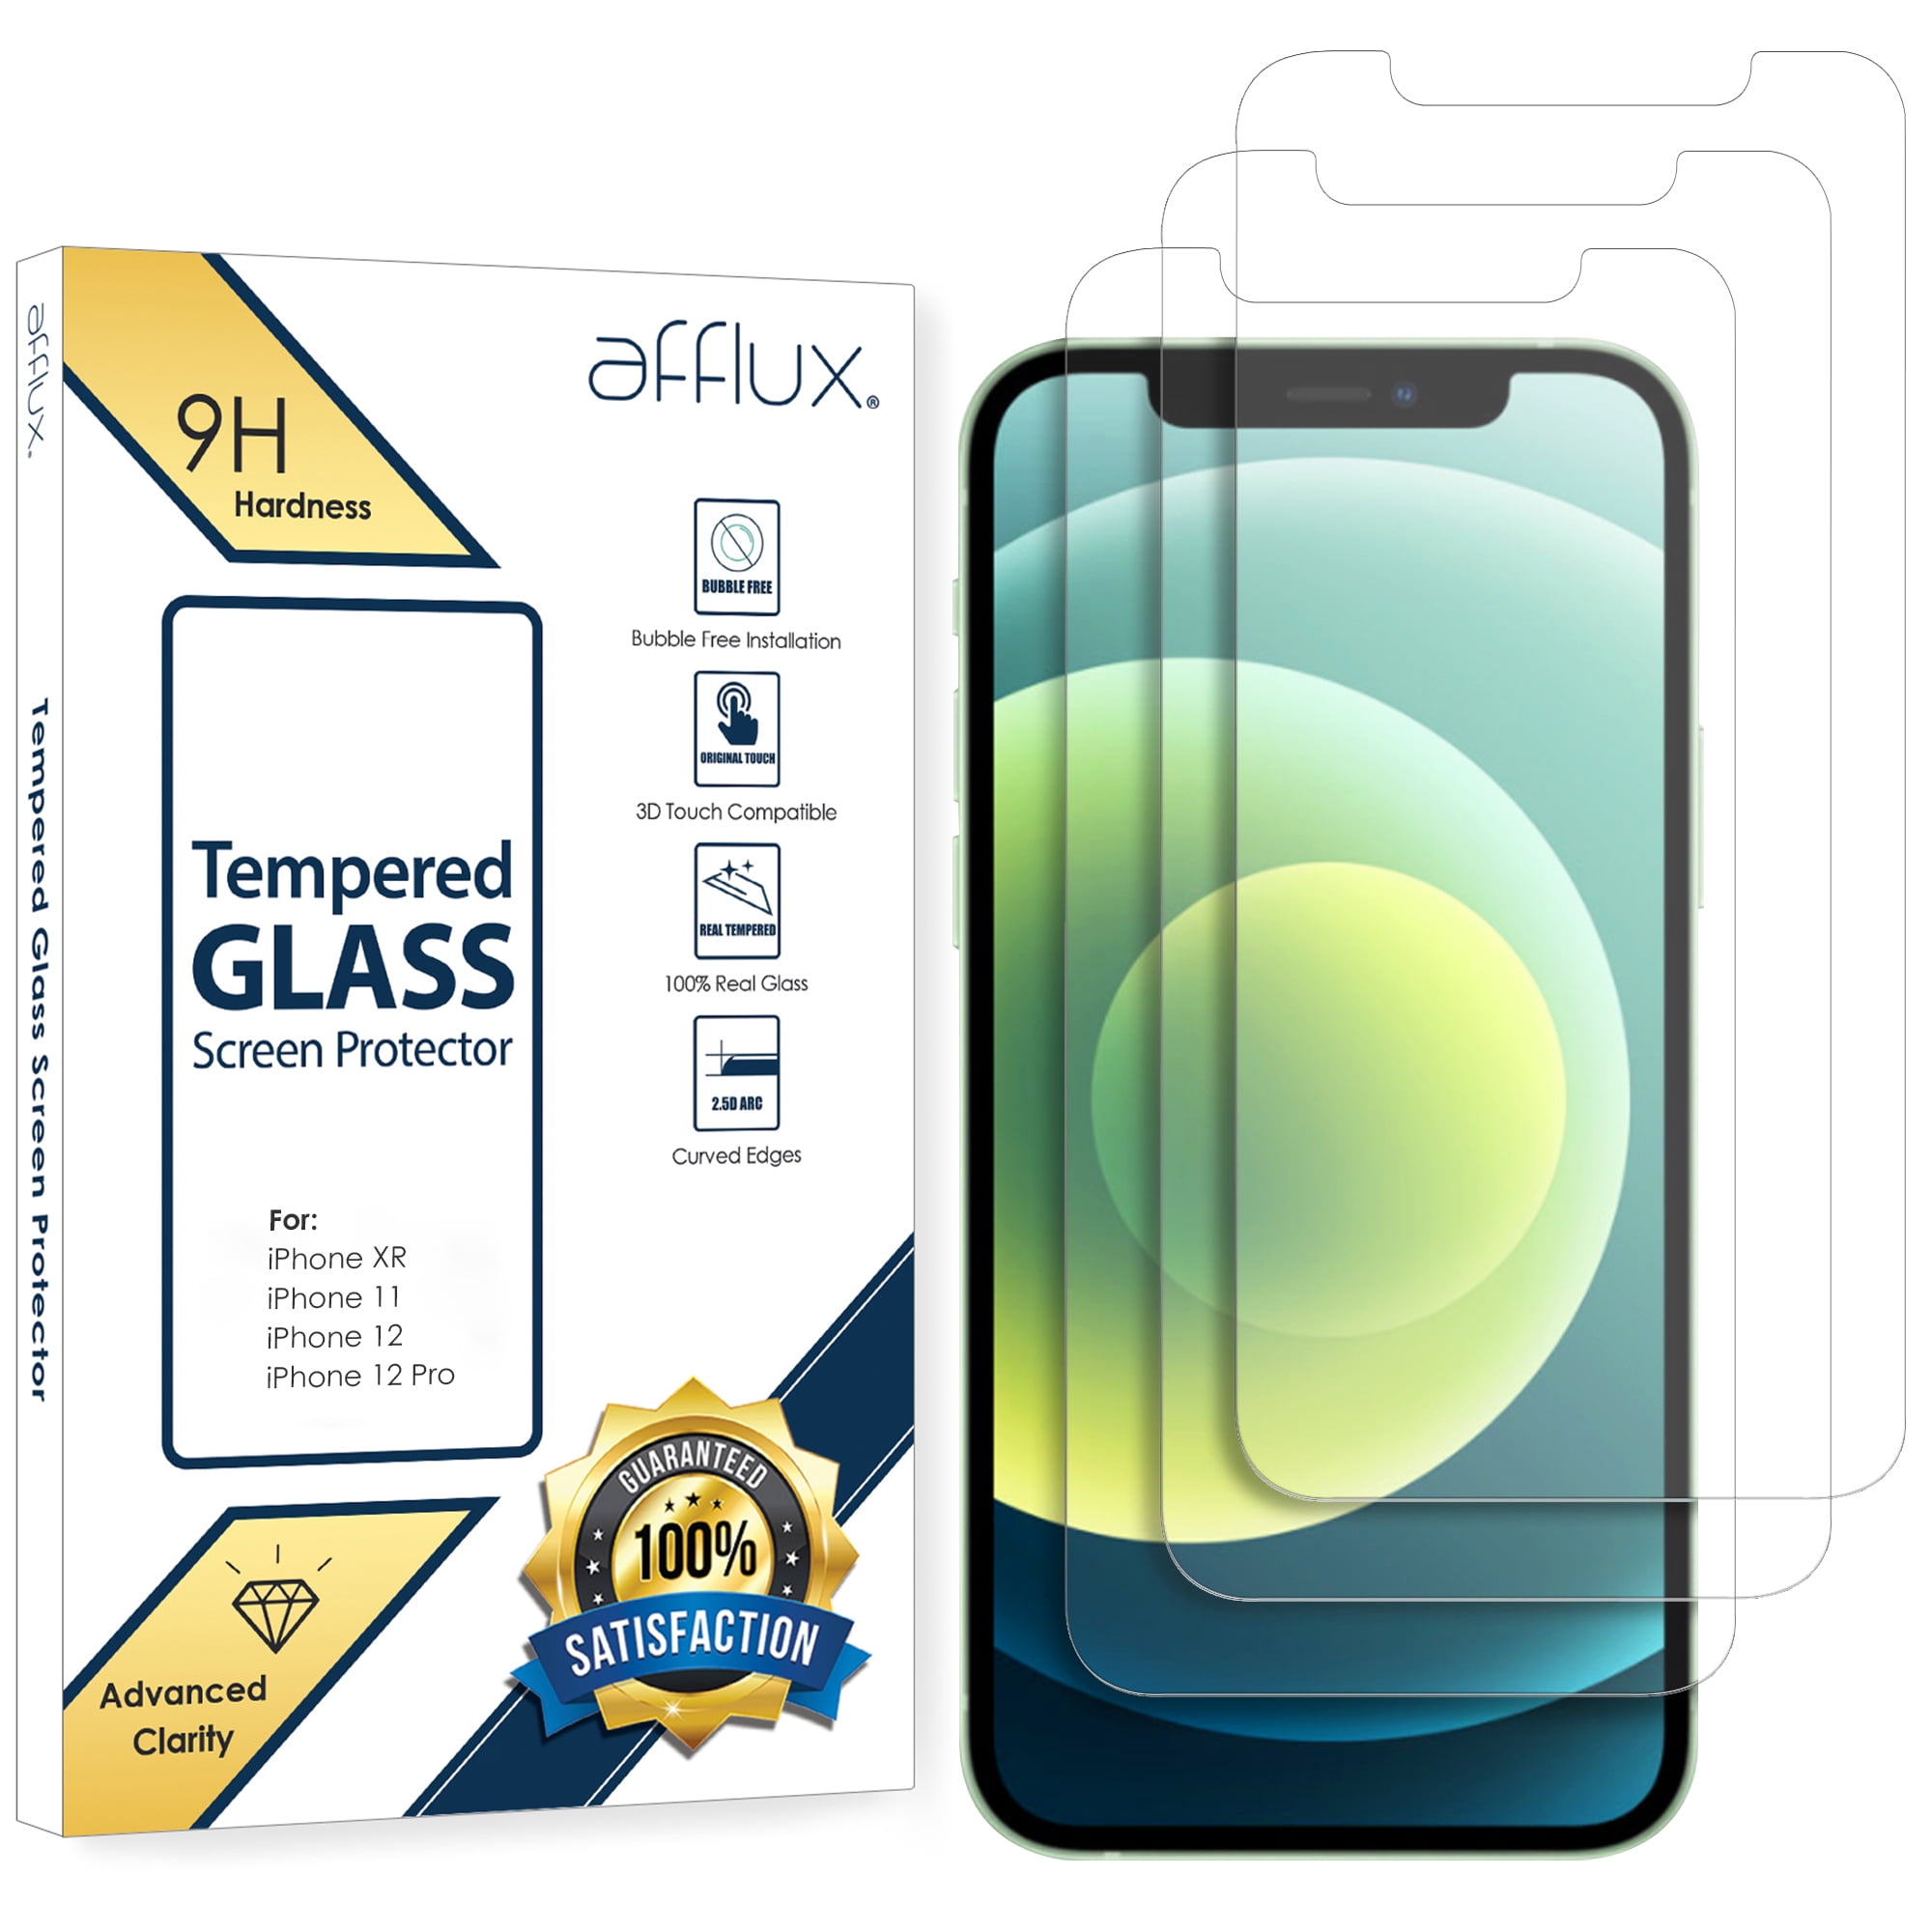 Bubble-Free Scratch Resistance Crystal Clear Tempered Glass Screen Protector for Apple iPhone XR 1 Pack NBKASE iPhone XR Screen Protector 